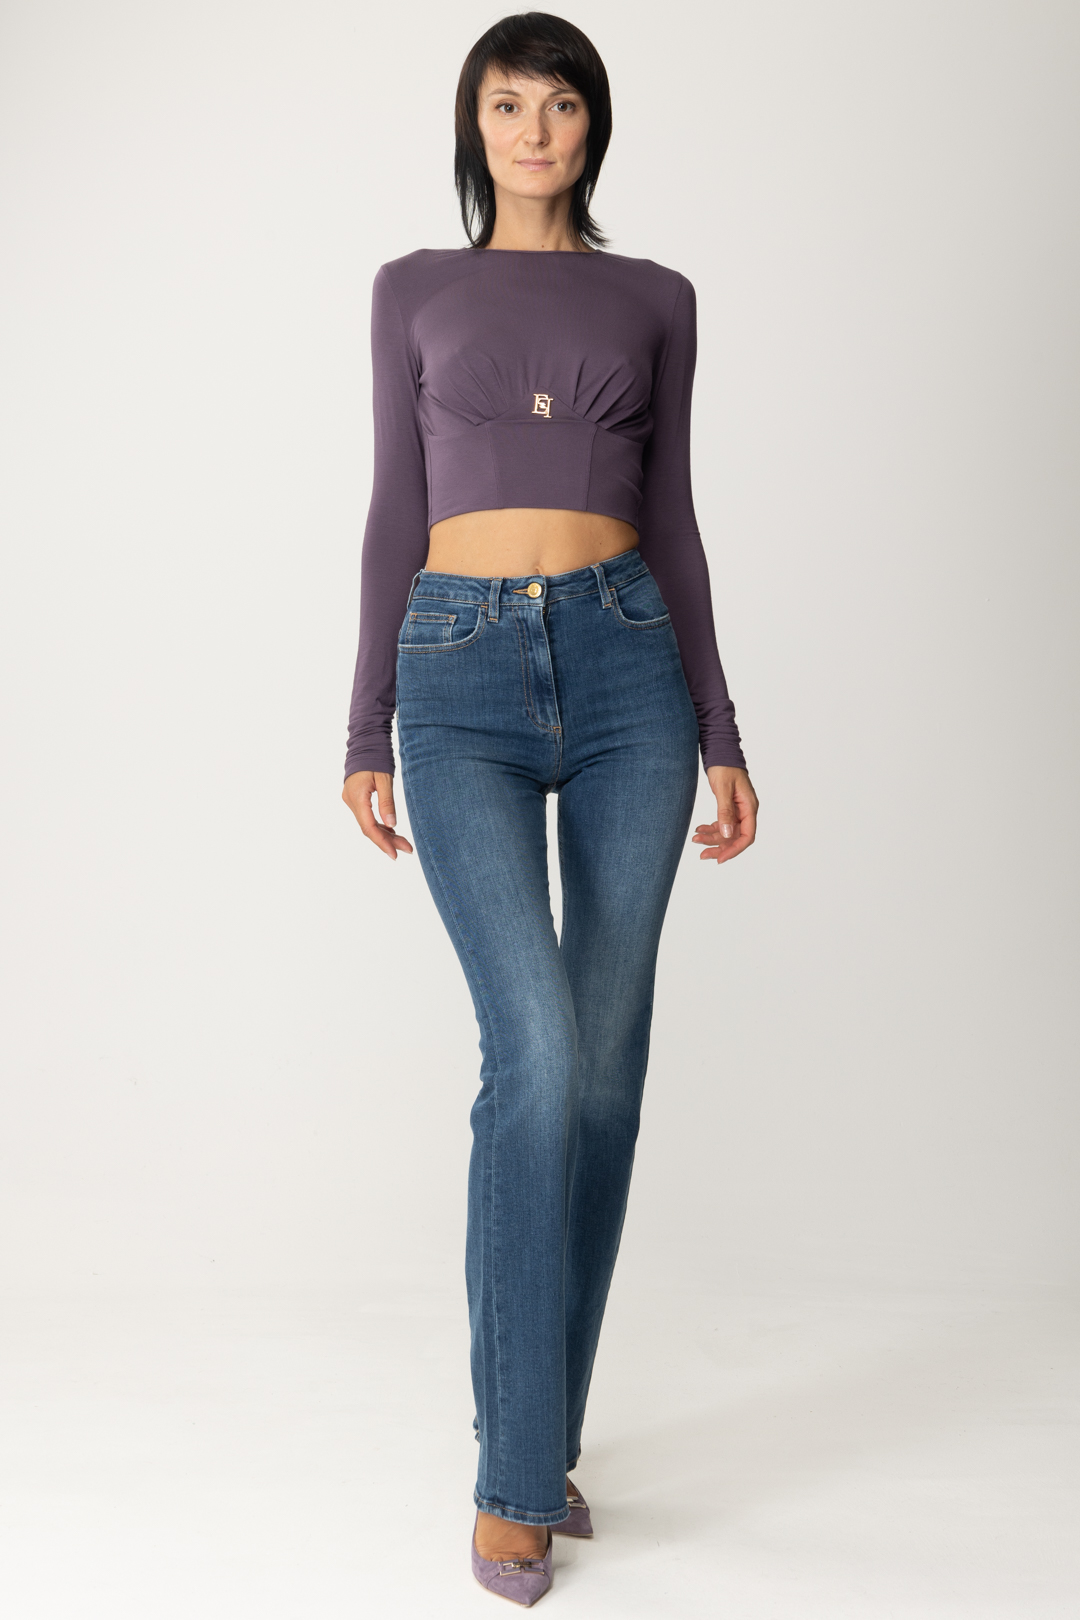 Preview: Elisabetta Franchi Top in jersey with bustier PRUGNA